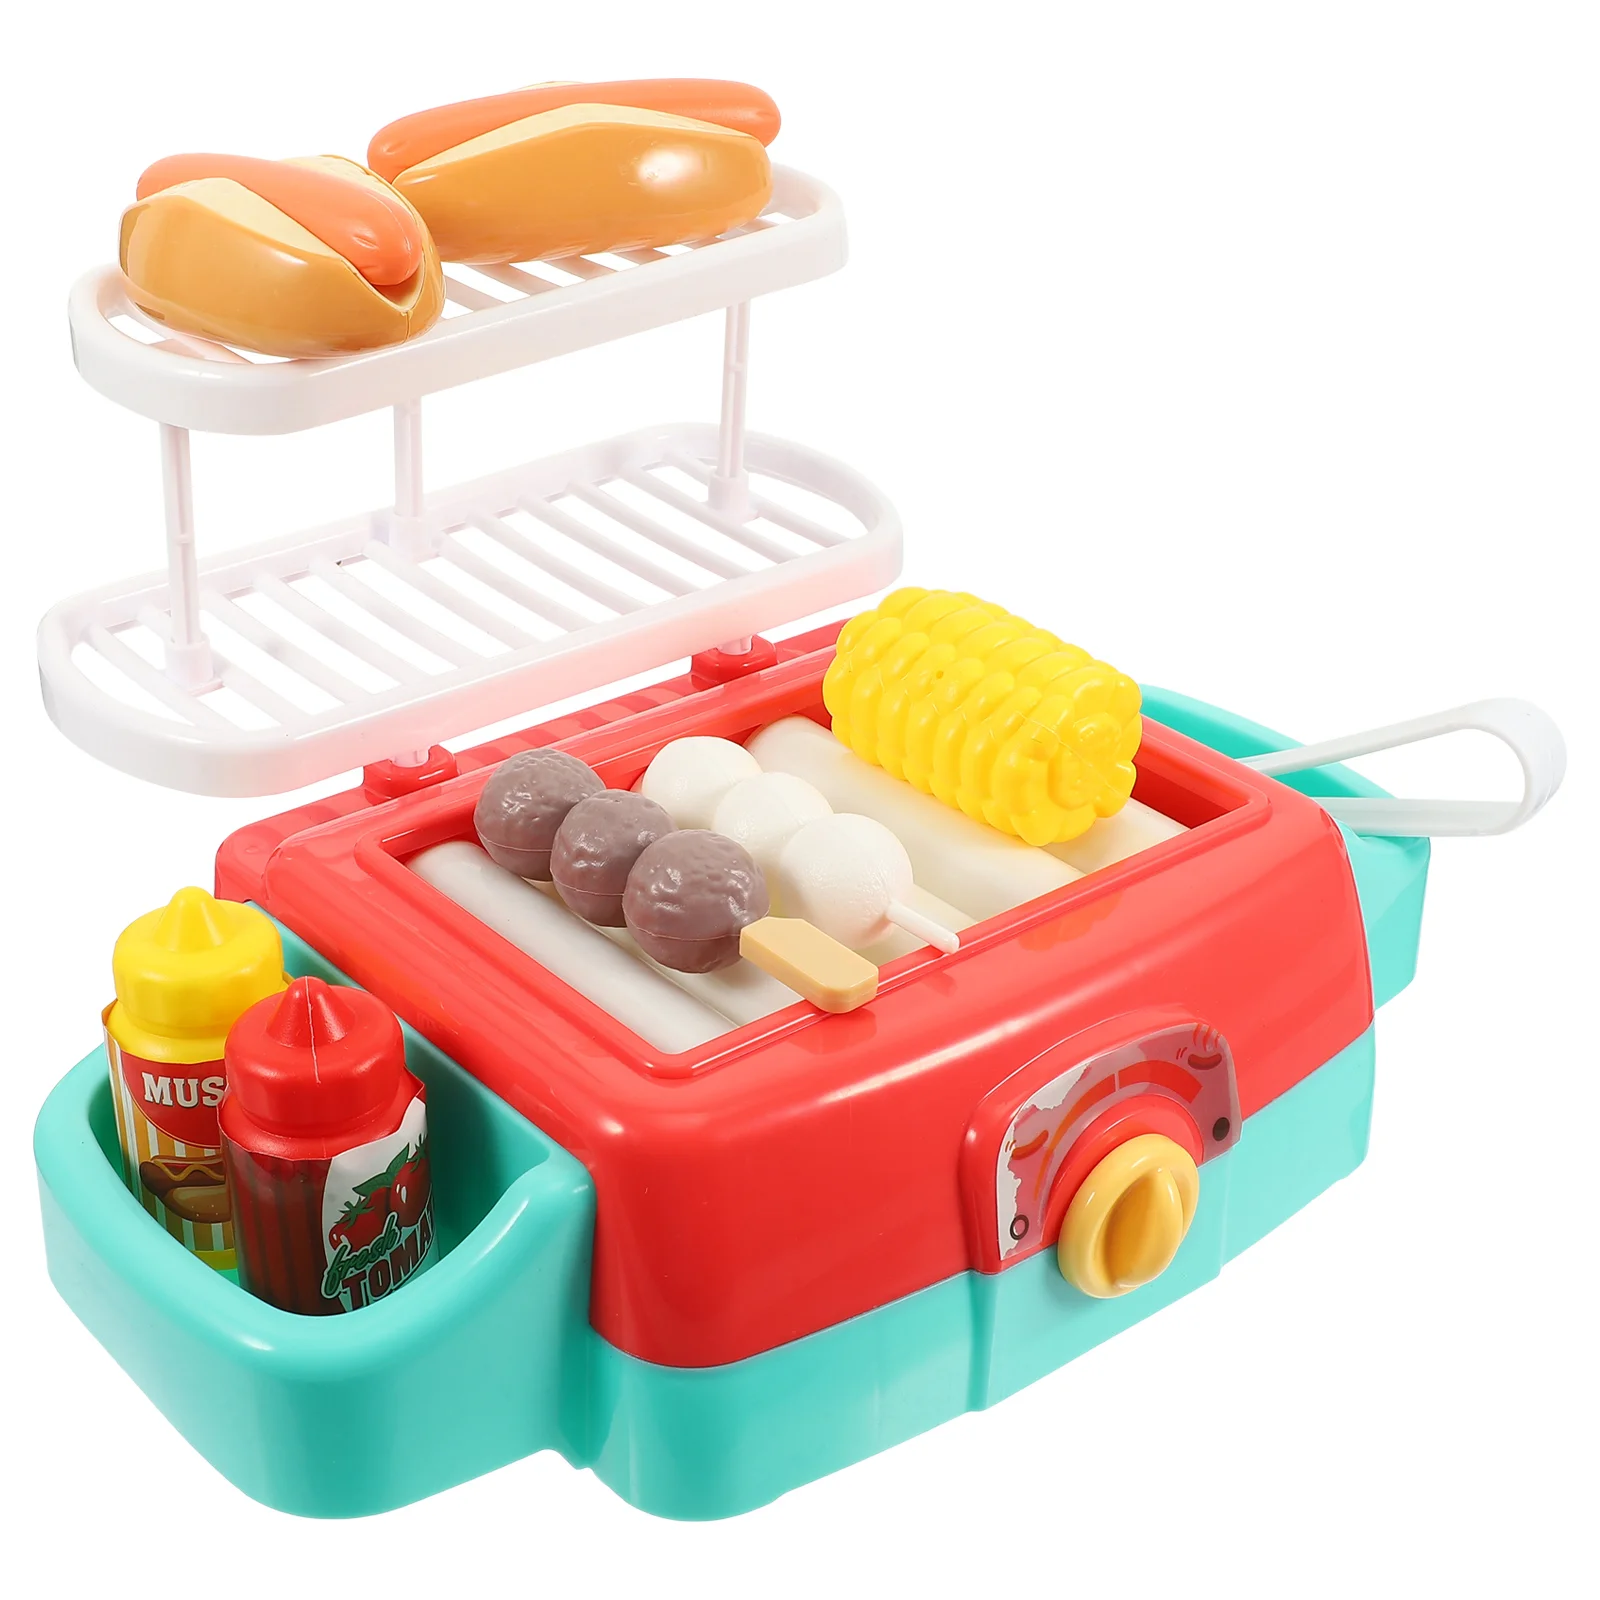 

Play House Fruit Machine Mini Power Washer Kids Playing Toy Barbecue Grill Abs Environmentally Friendly Plastic Miniature Child